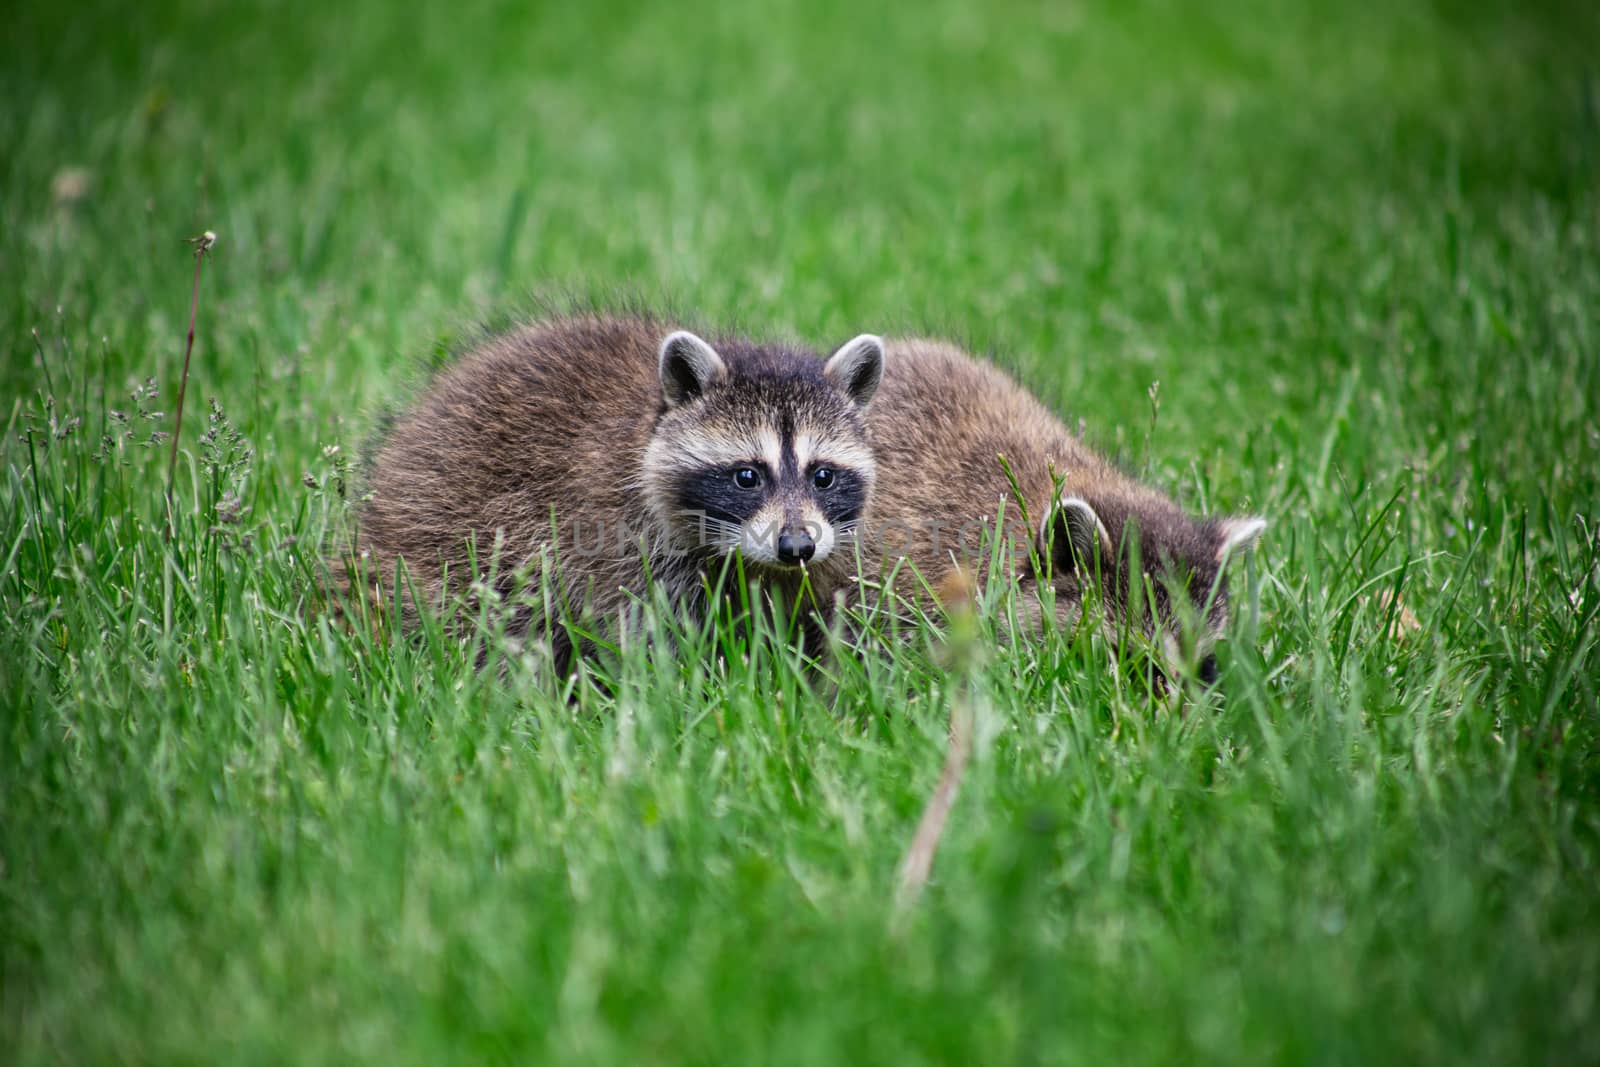 Small baby raccon foraging for food in the grass